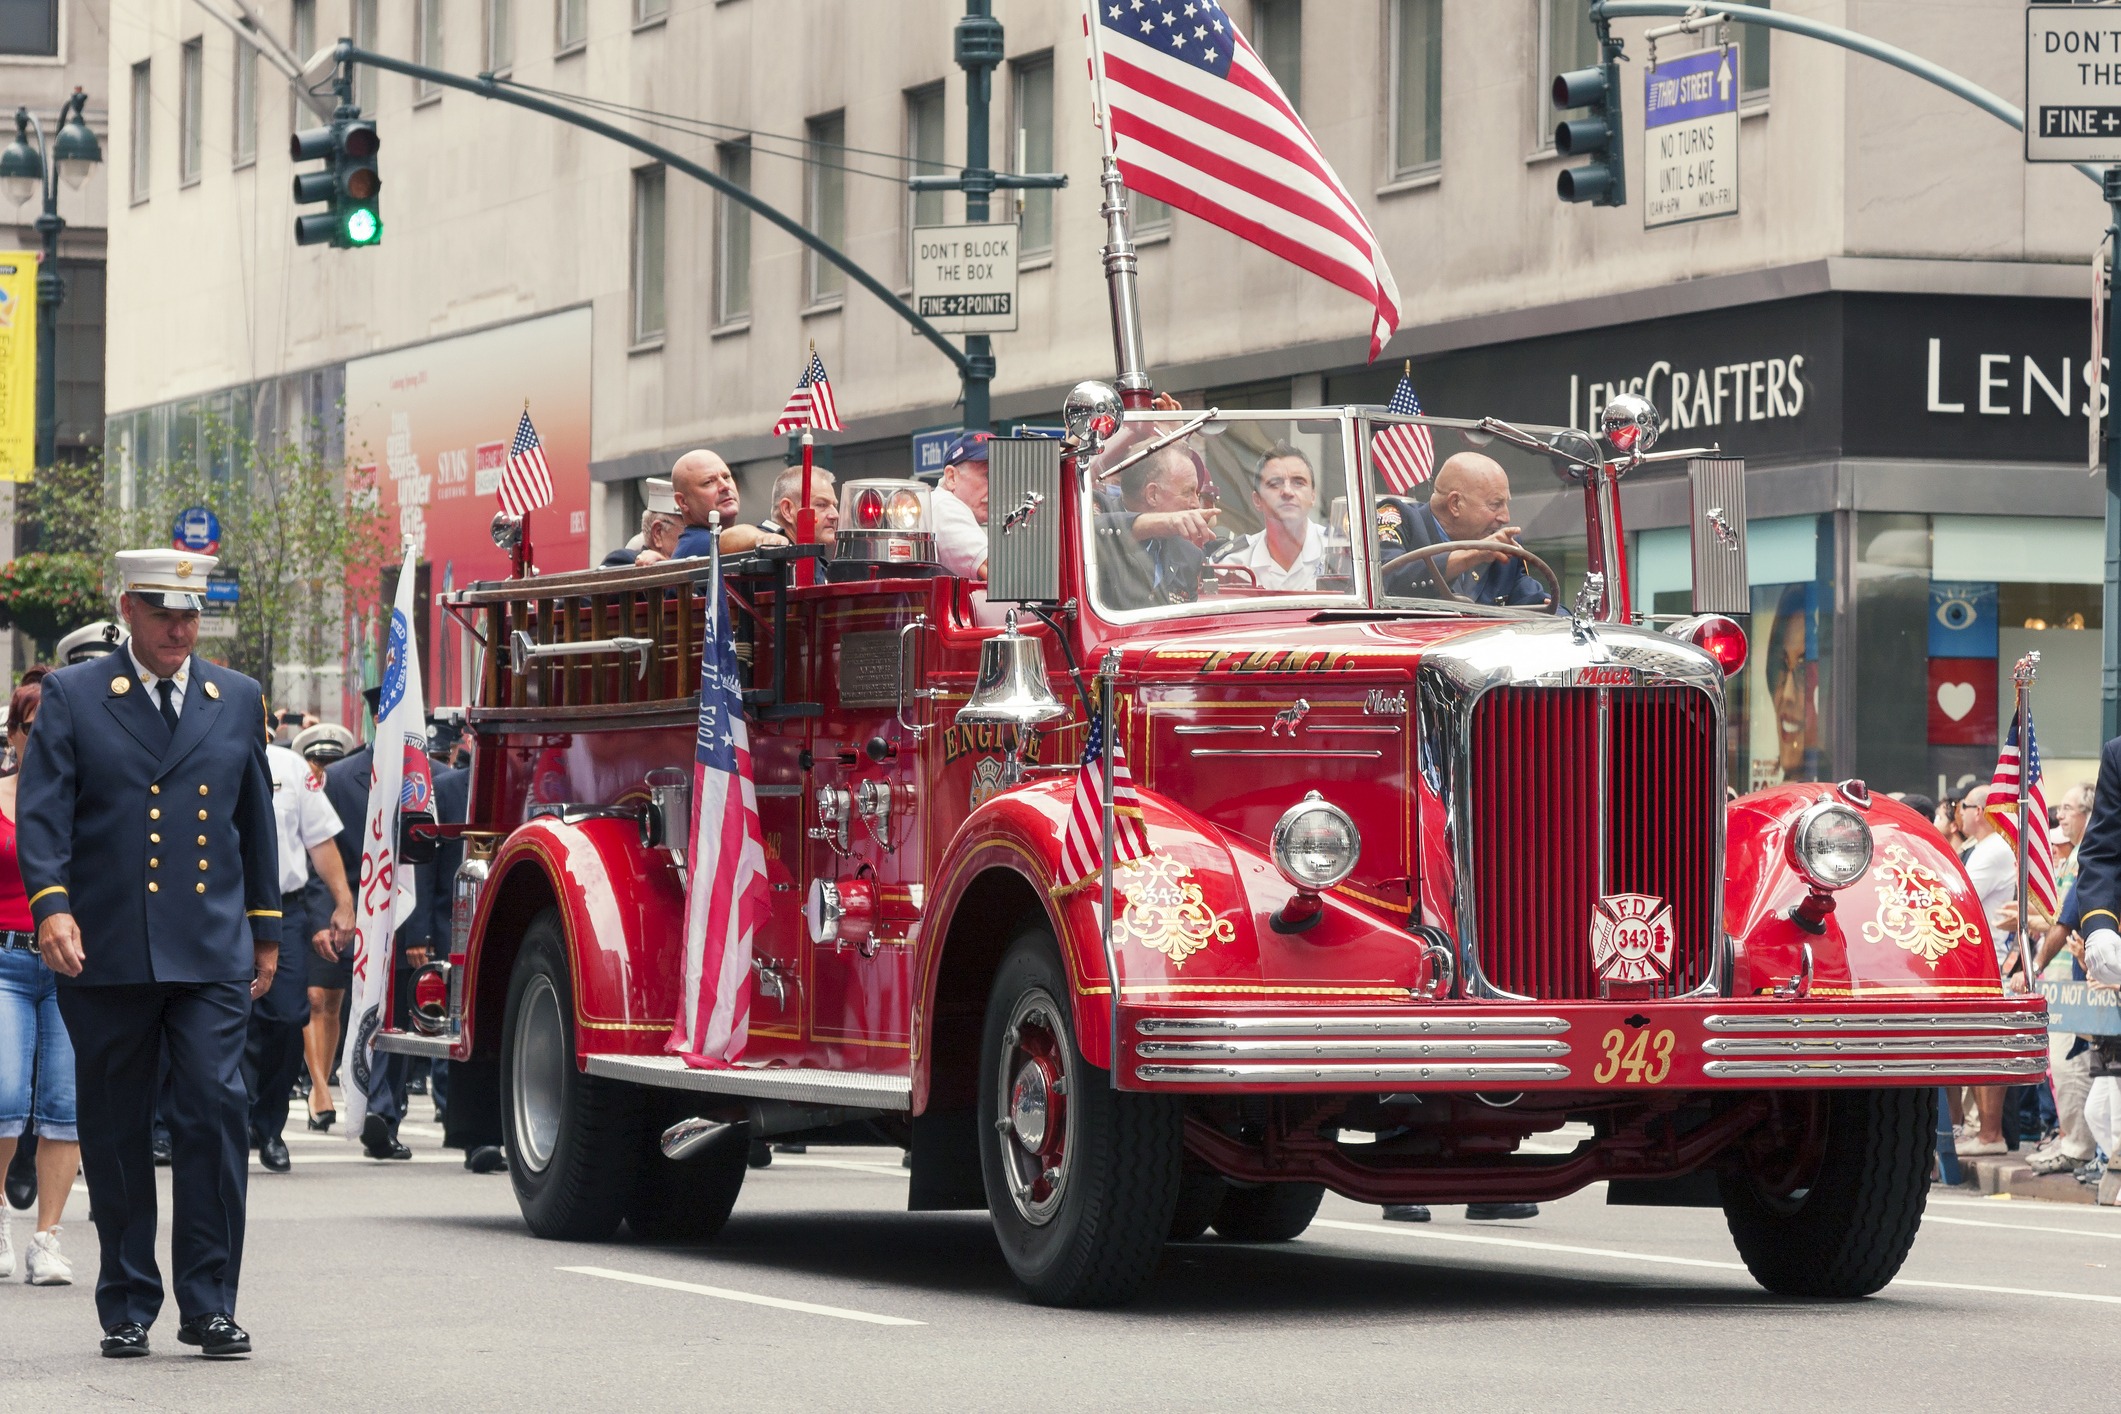 A Labor Day Parade in New York City, 2010